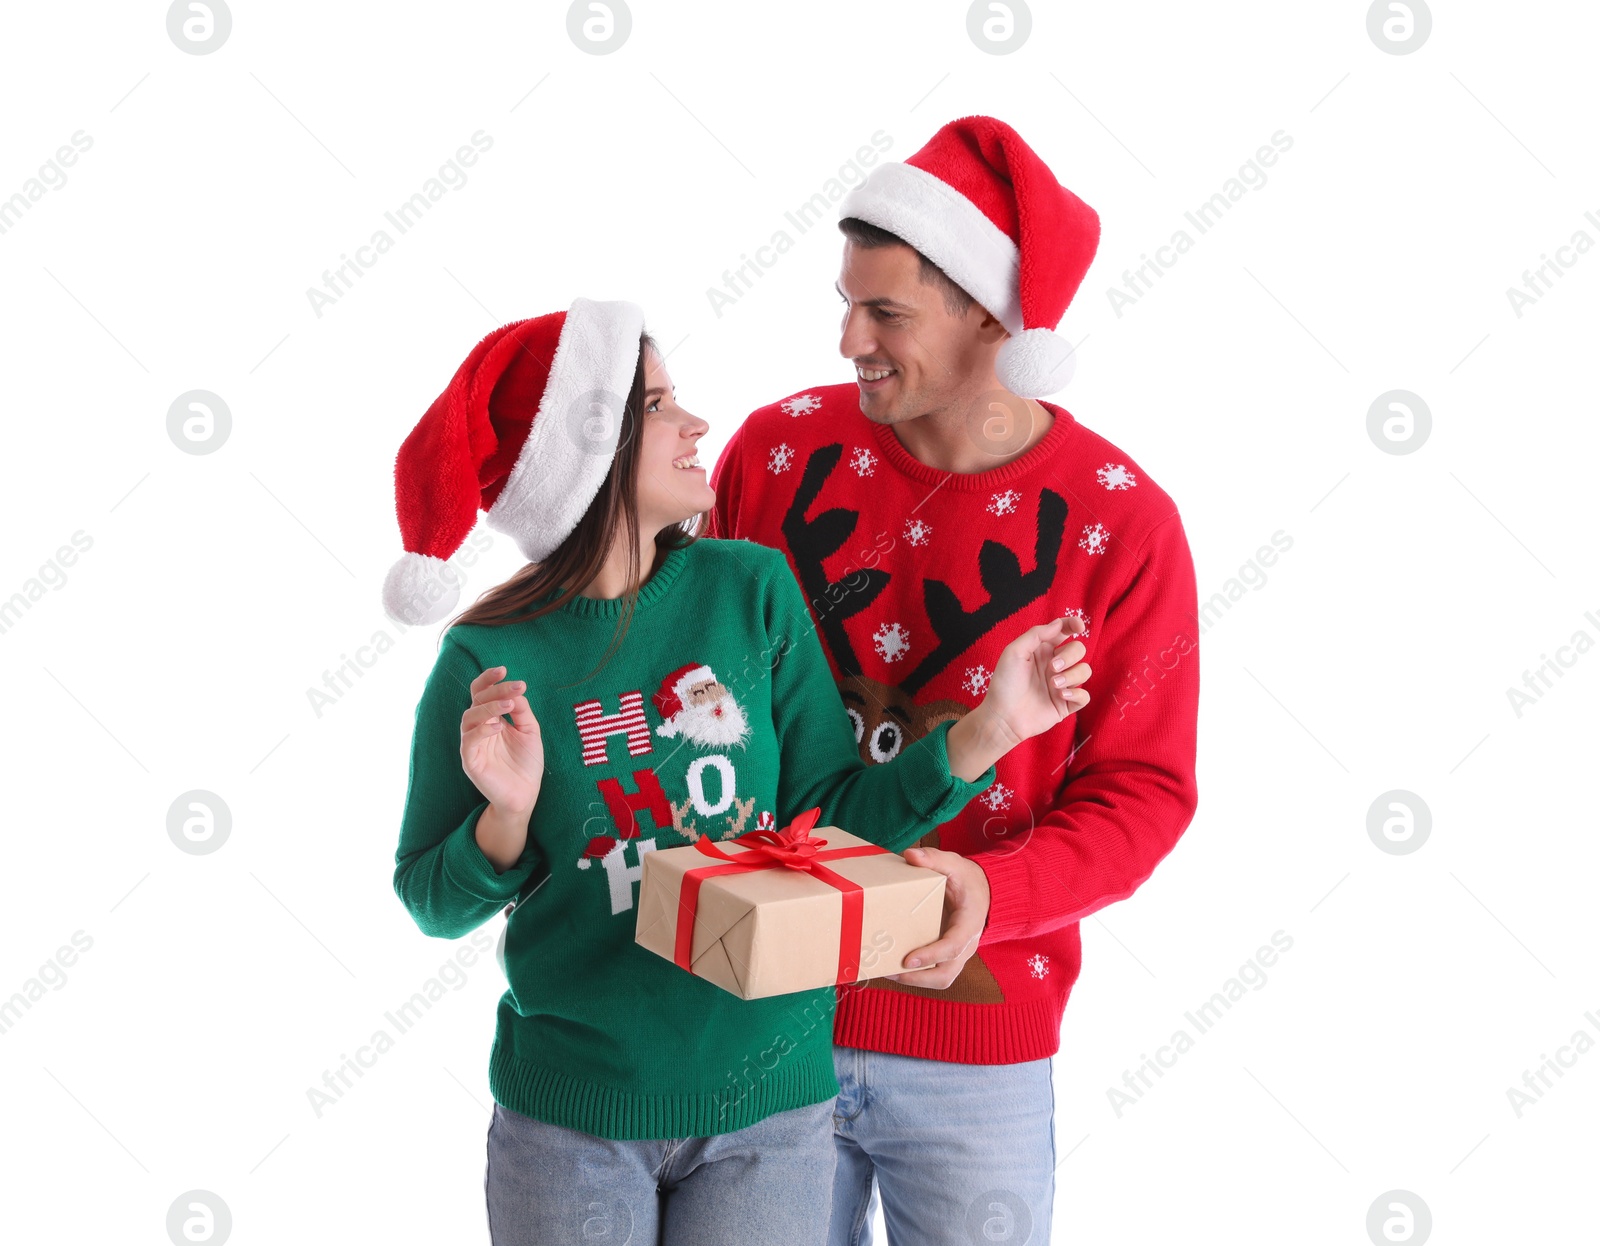 Photo of Man presenting Christmas gift to his girlfriend on white background